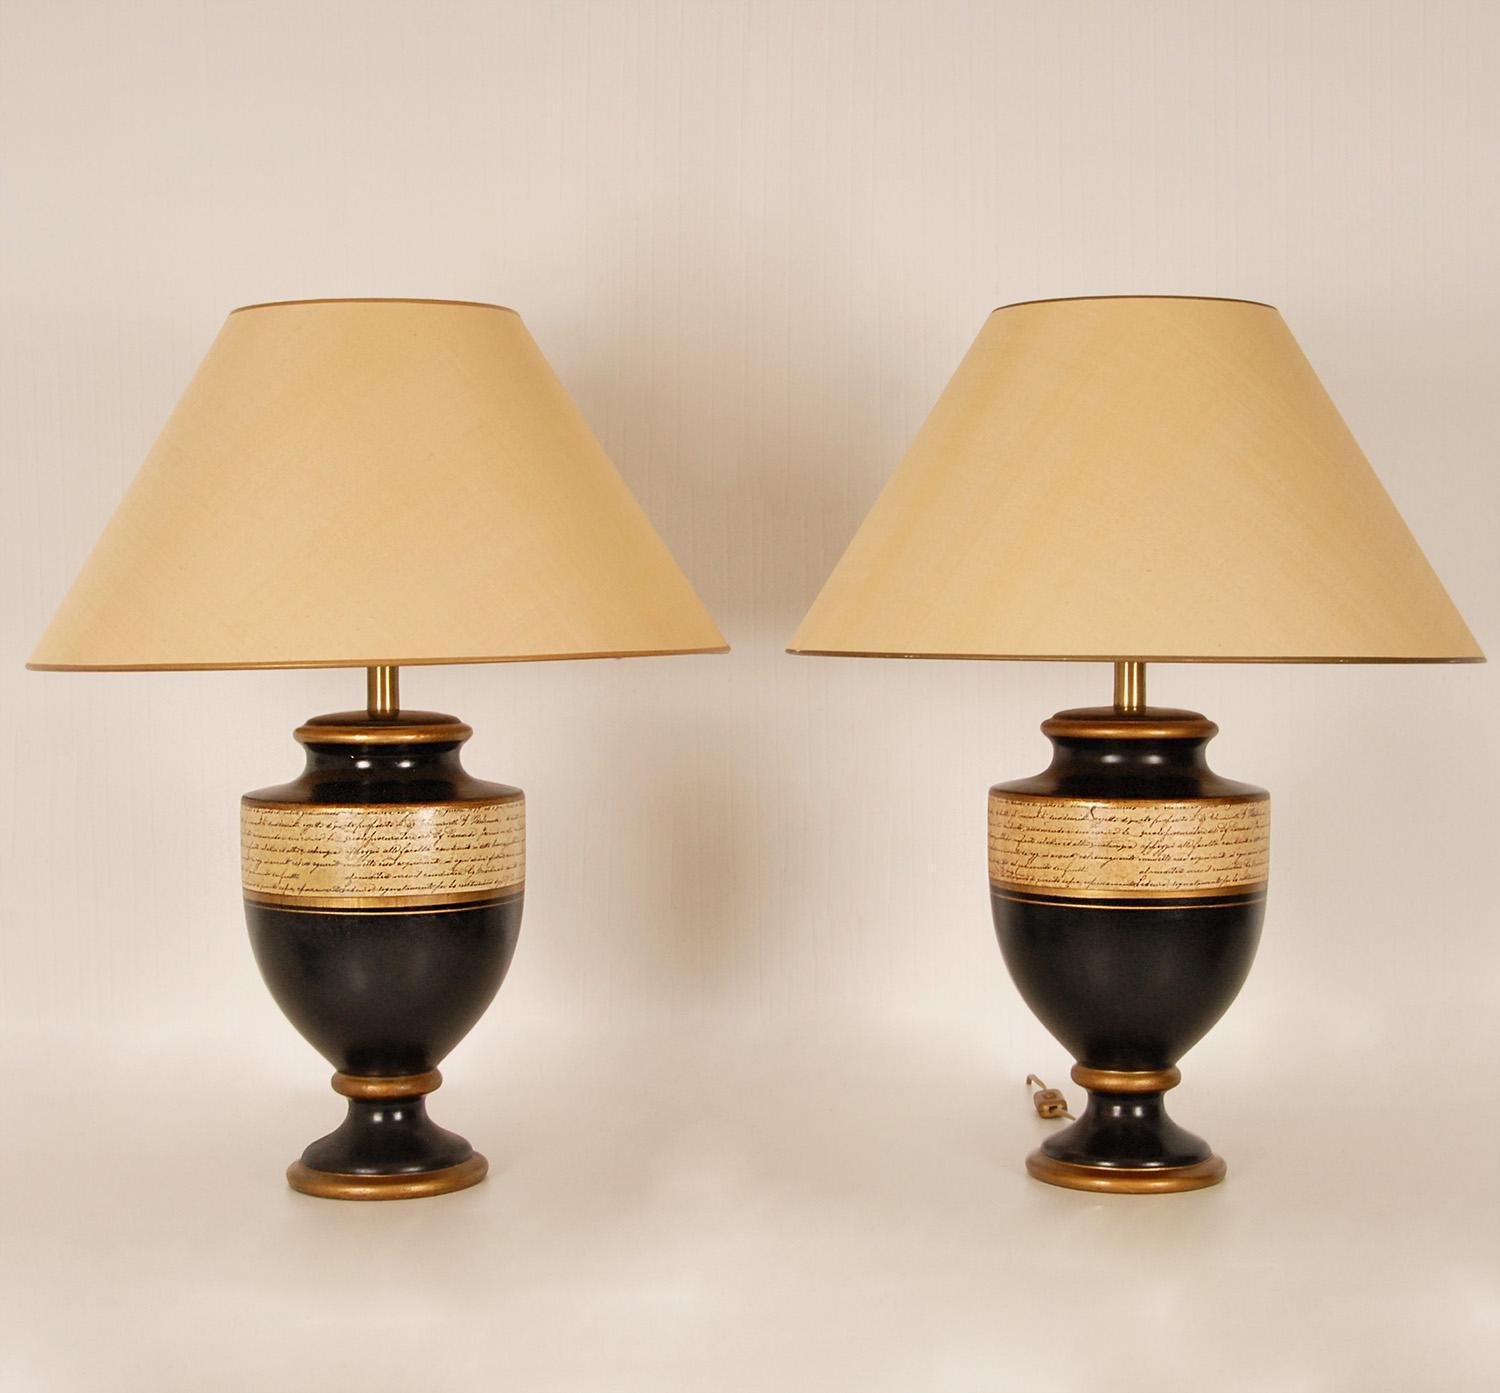 Vintage Mid Century French Baluster vase Ceramic Table Lamps French 1970s - a Pair
Impressive and enchanting table lamps.
Design: In the manner of Robert Kostka, Longwy, Louis Drimmer, Maison Le Dauphine
Style: Vintage, Timeless, Mid century,